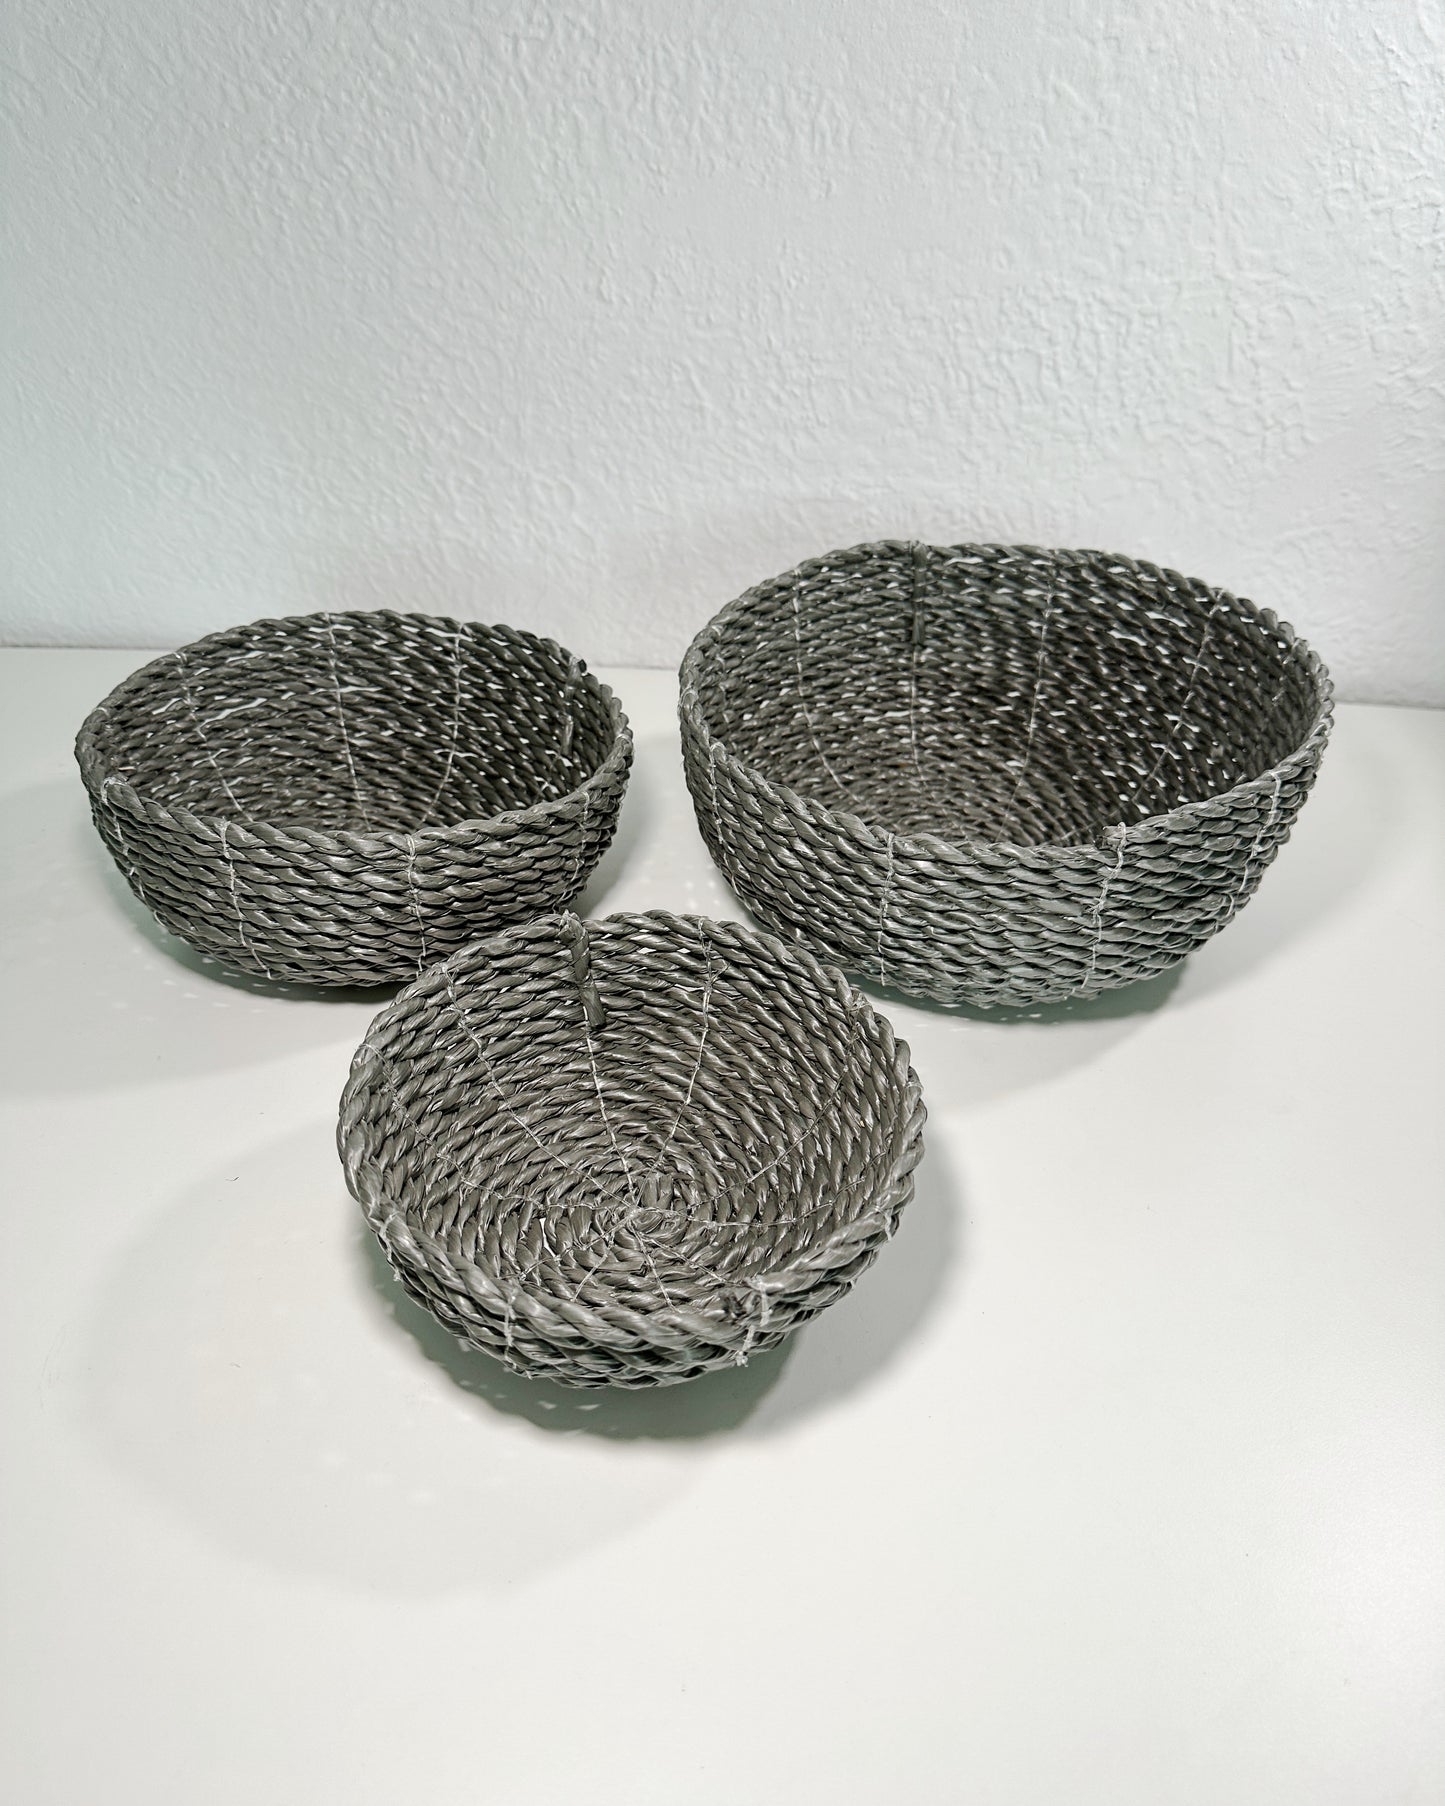 Mimpi Handwoven Bread Baskets (Set of 3) - Charcoal